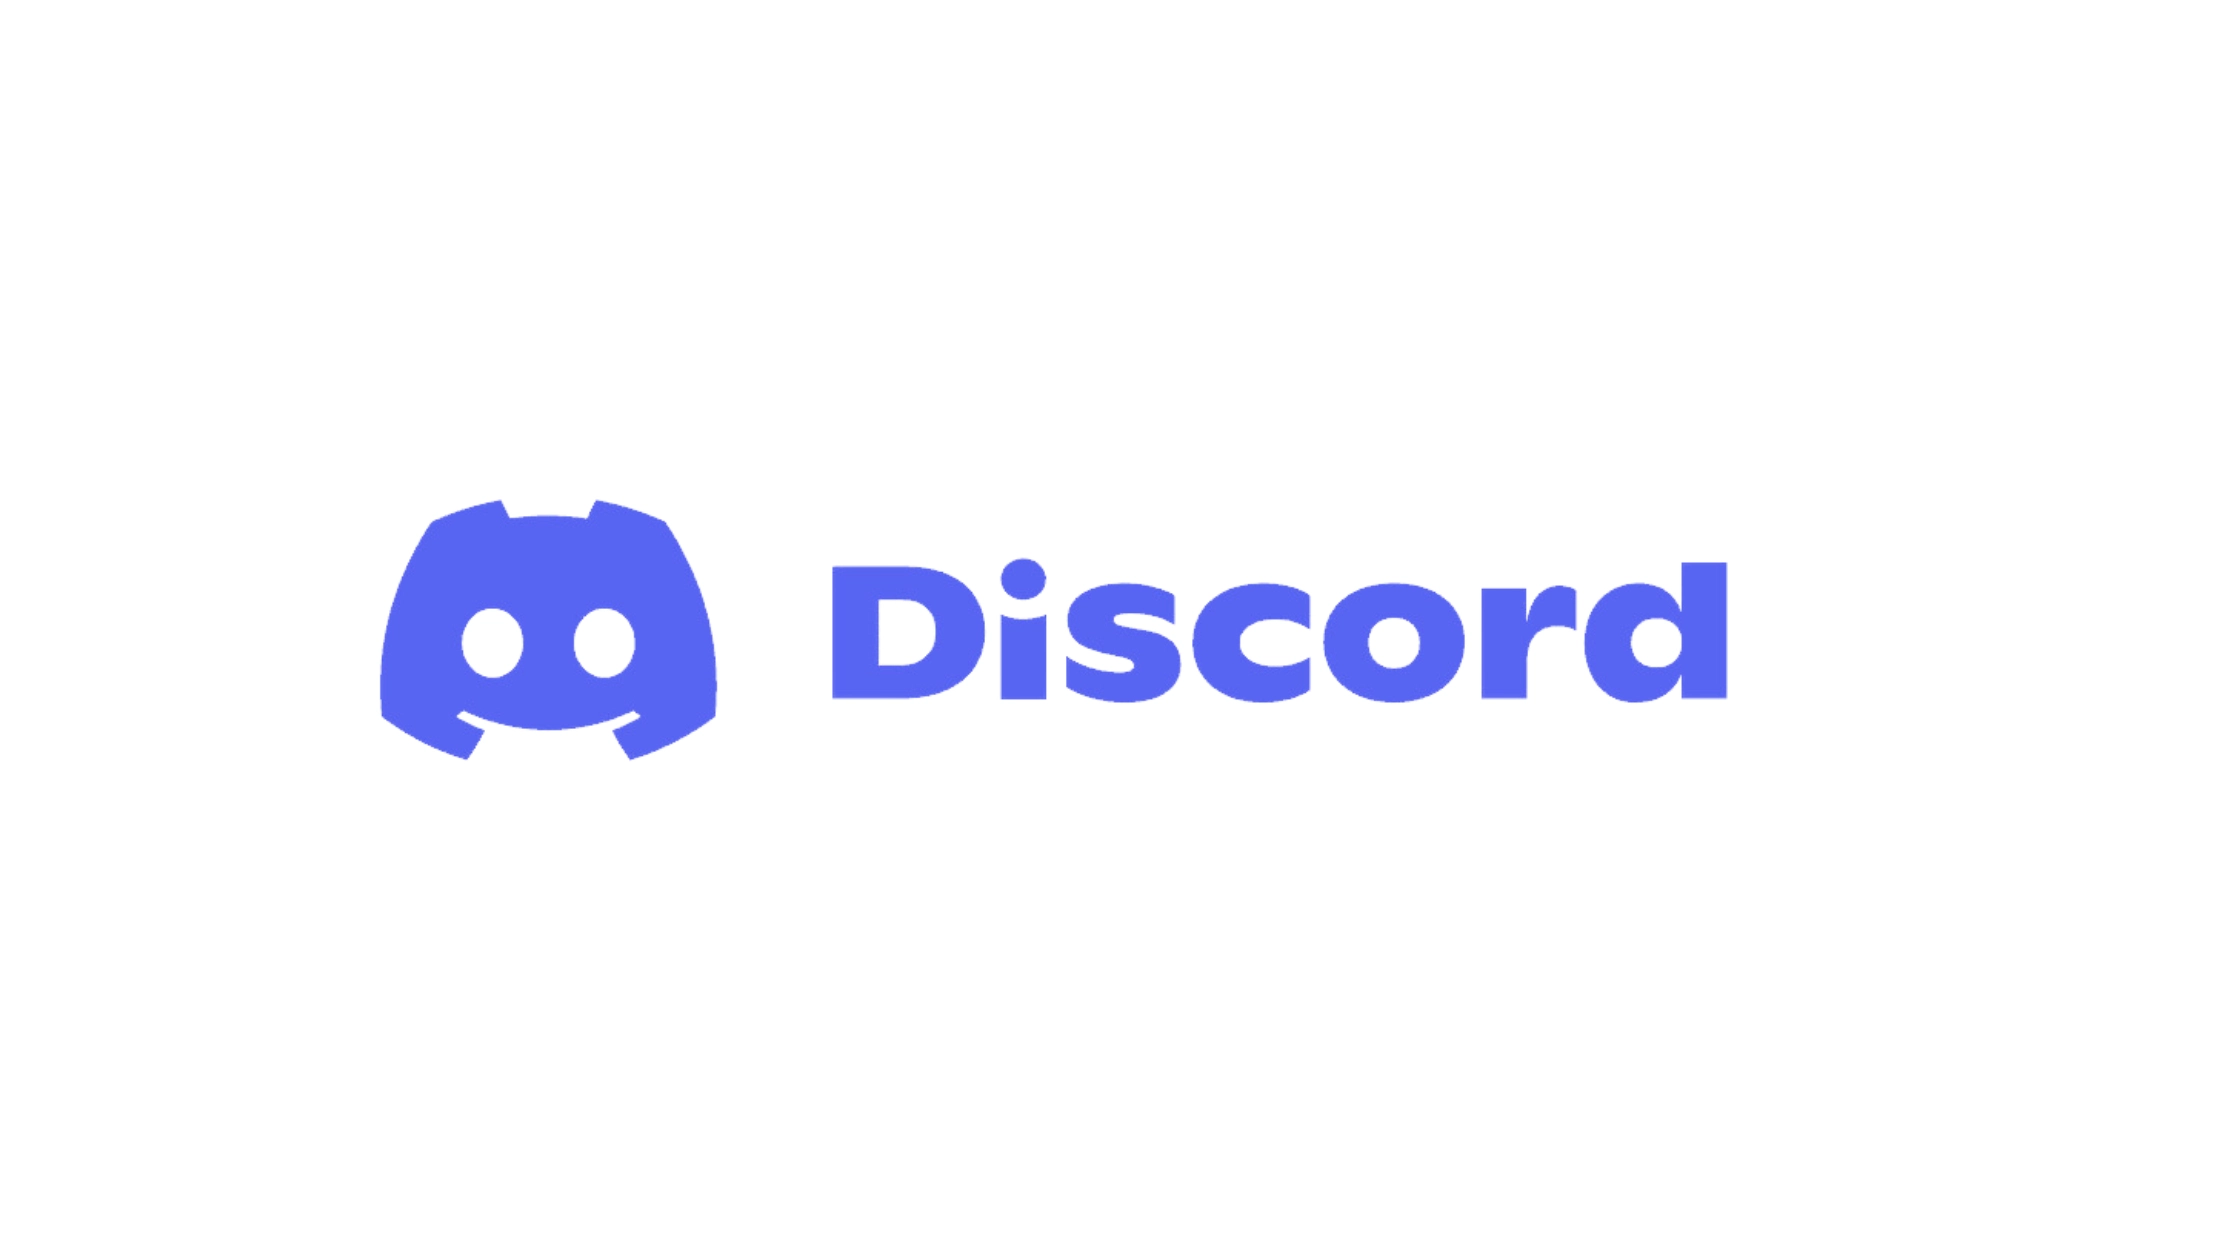 What Font Does Discord Use